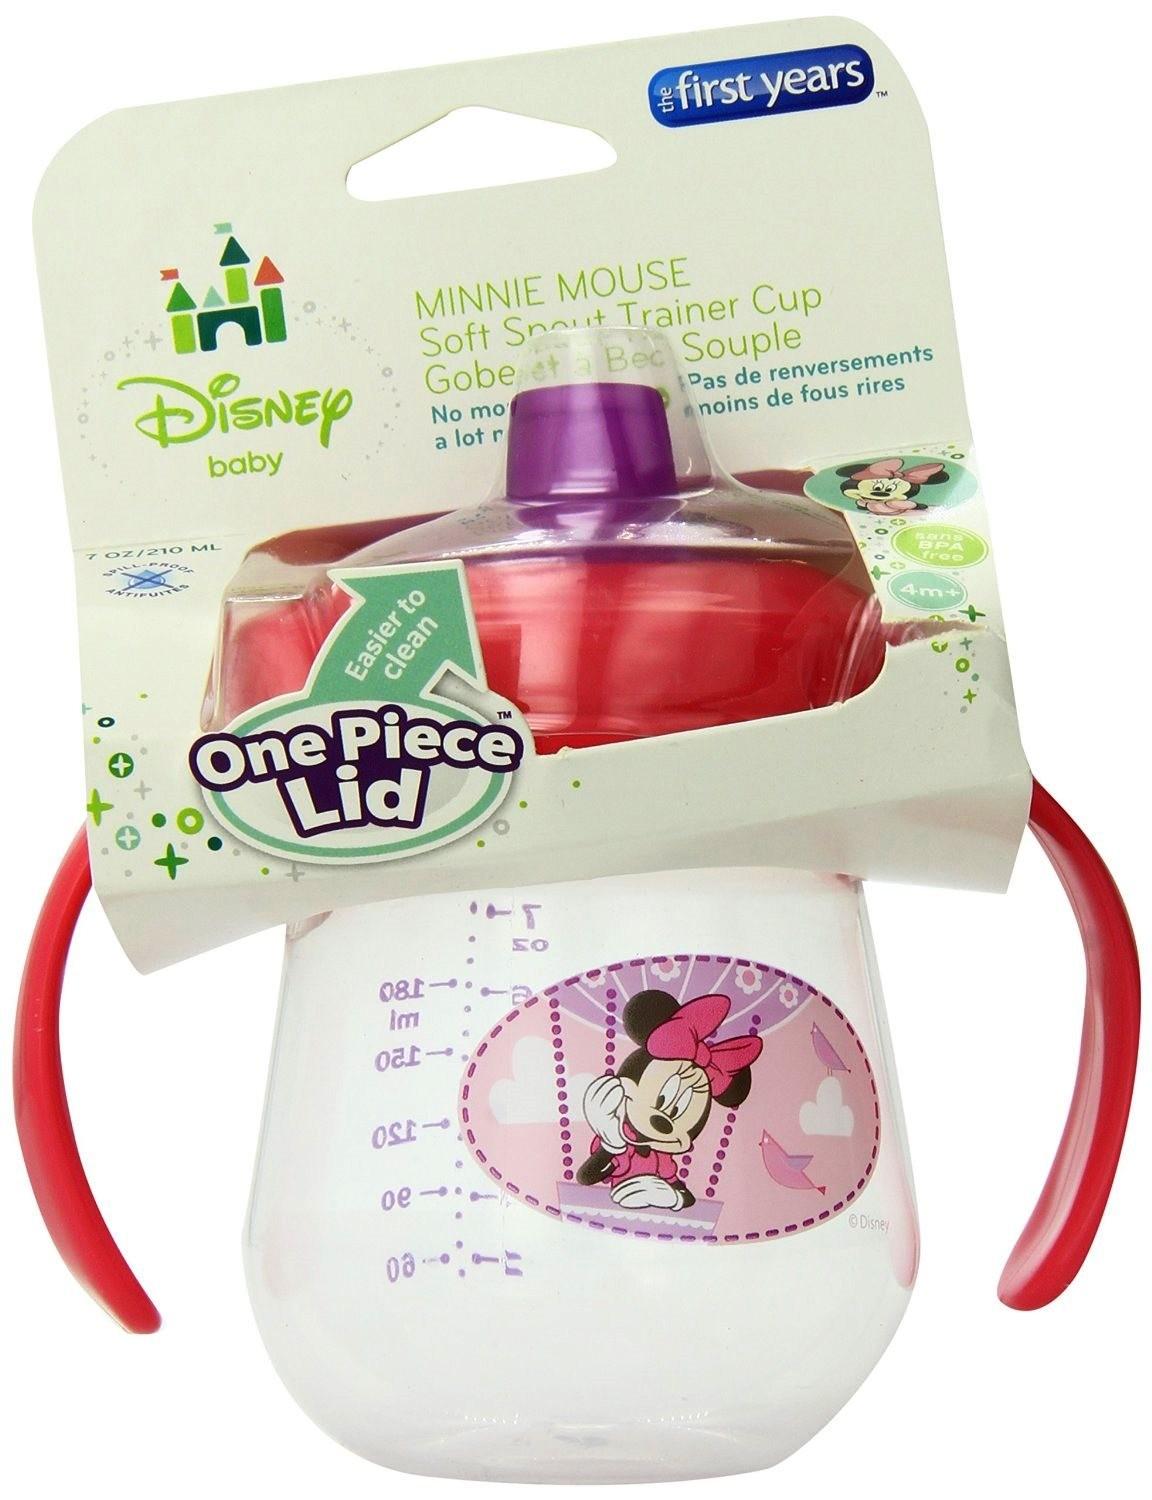 The First Years Minnie Soft Spout Trainer Cup with Handles - 7oz